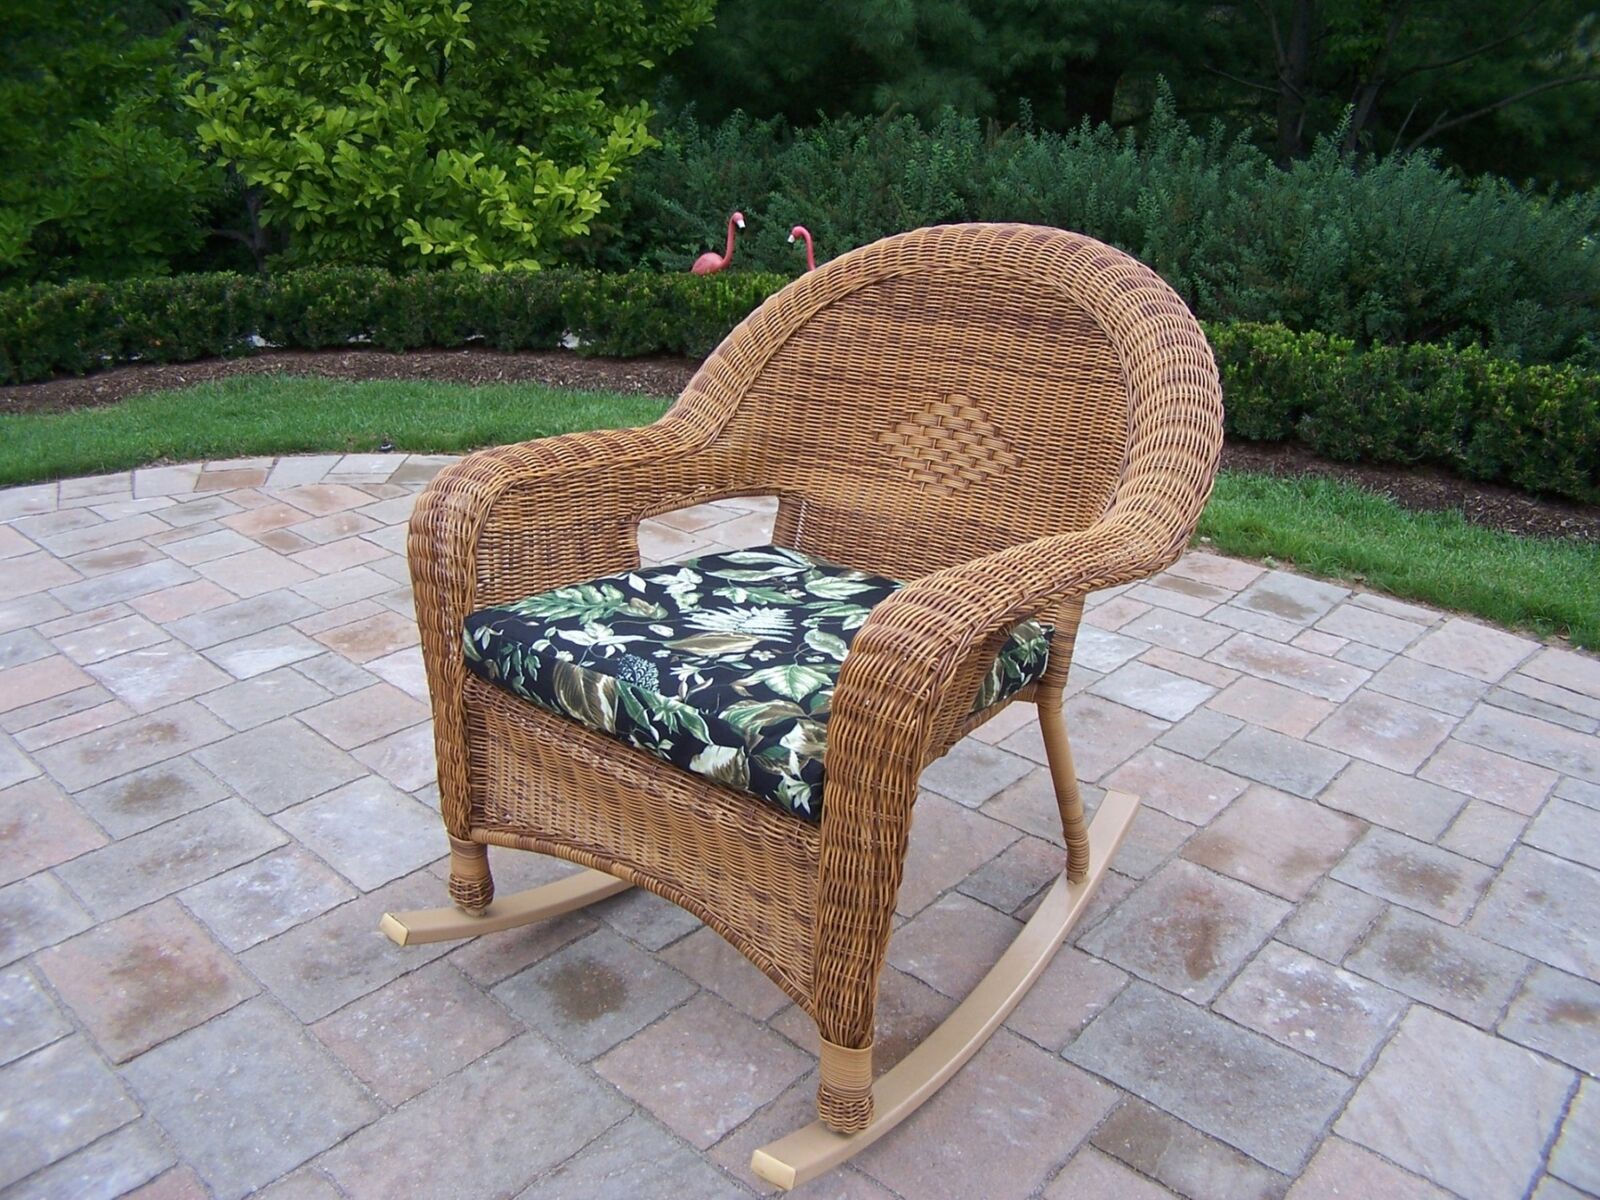 Outdoor Living and Style Pack of 2 Brown Outdoor Patio Resin Wicker Rocking Chairs - Navy Blue Cushions